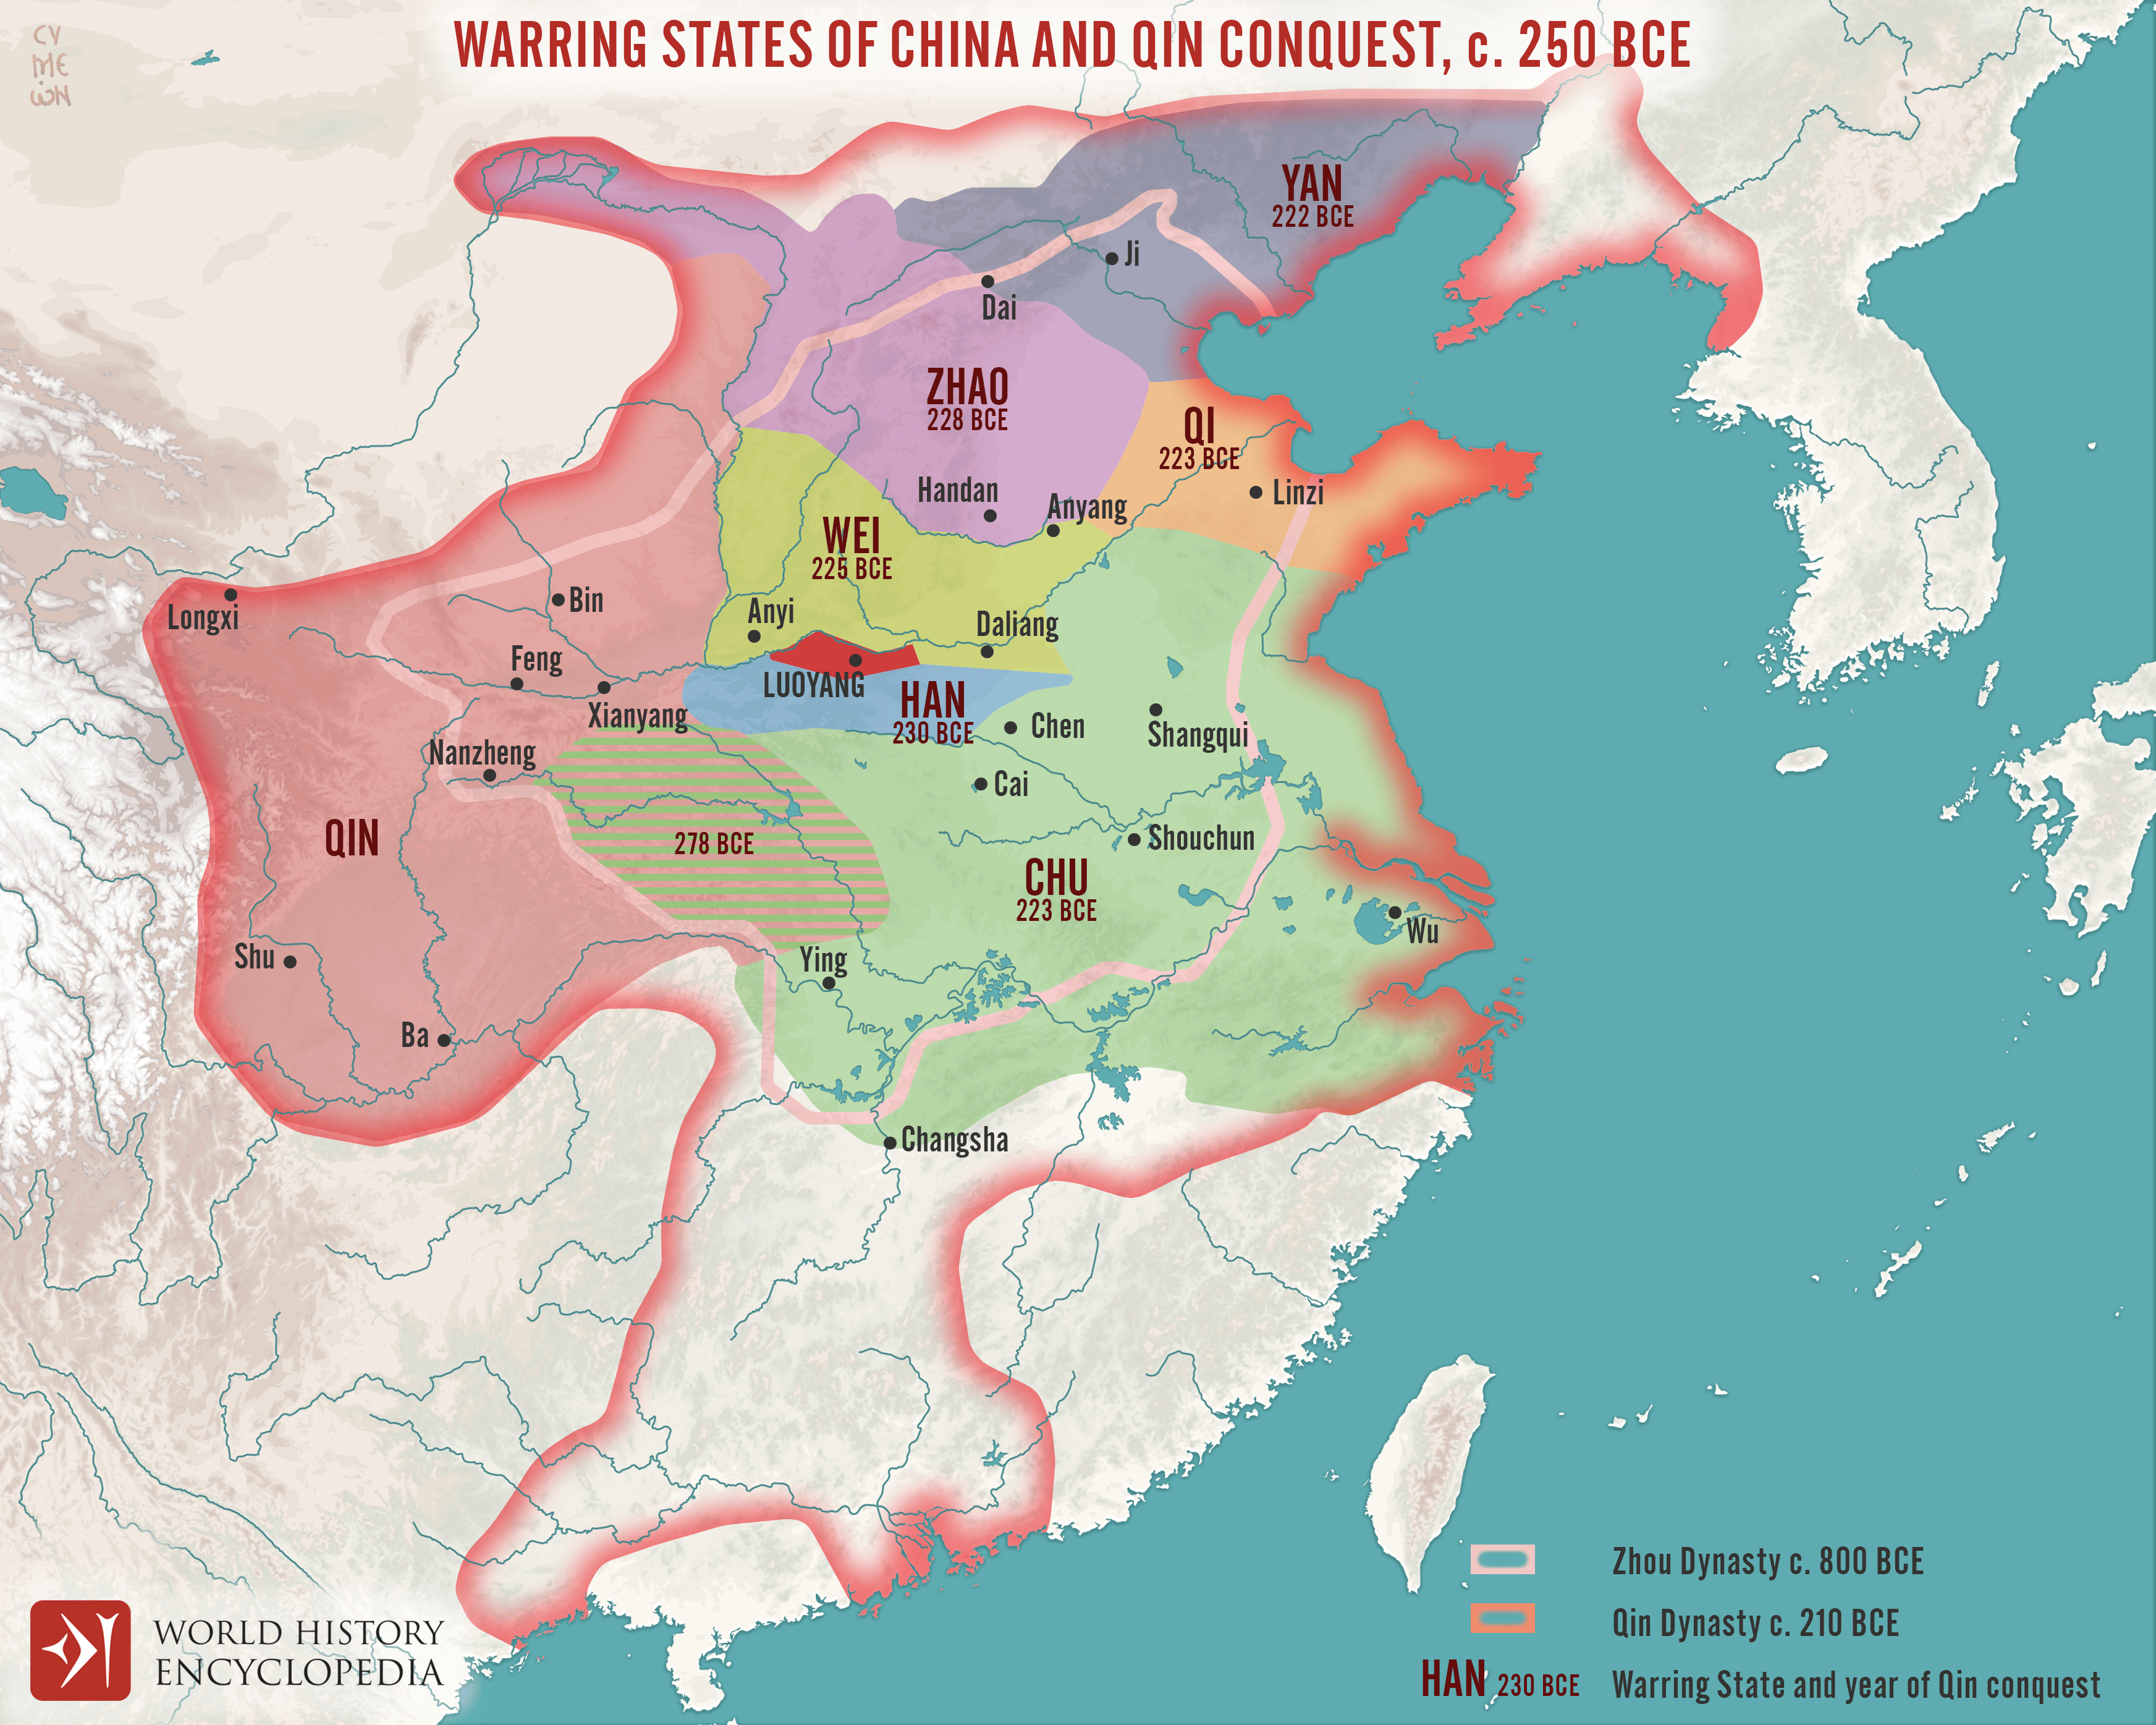 Warring states of china and Qin contest, circa 250 BCE.png